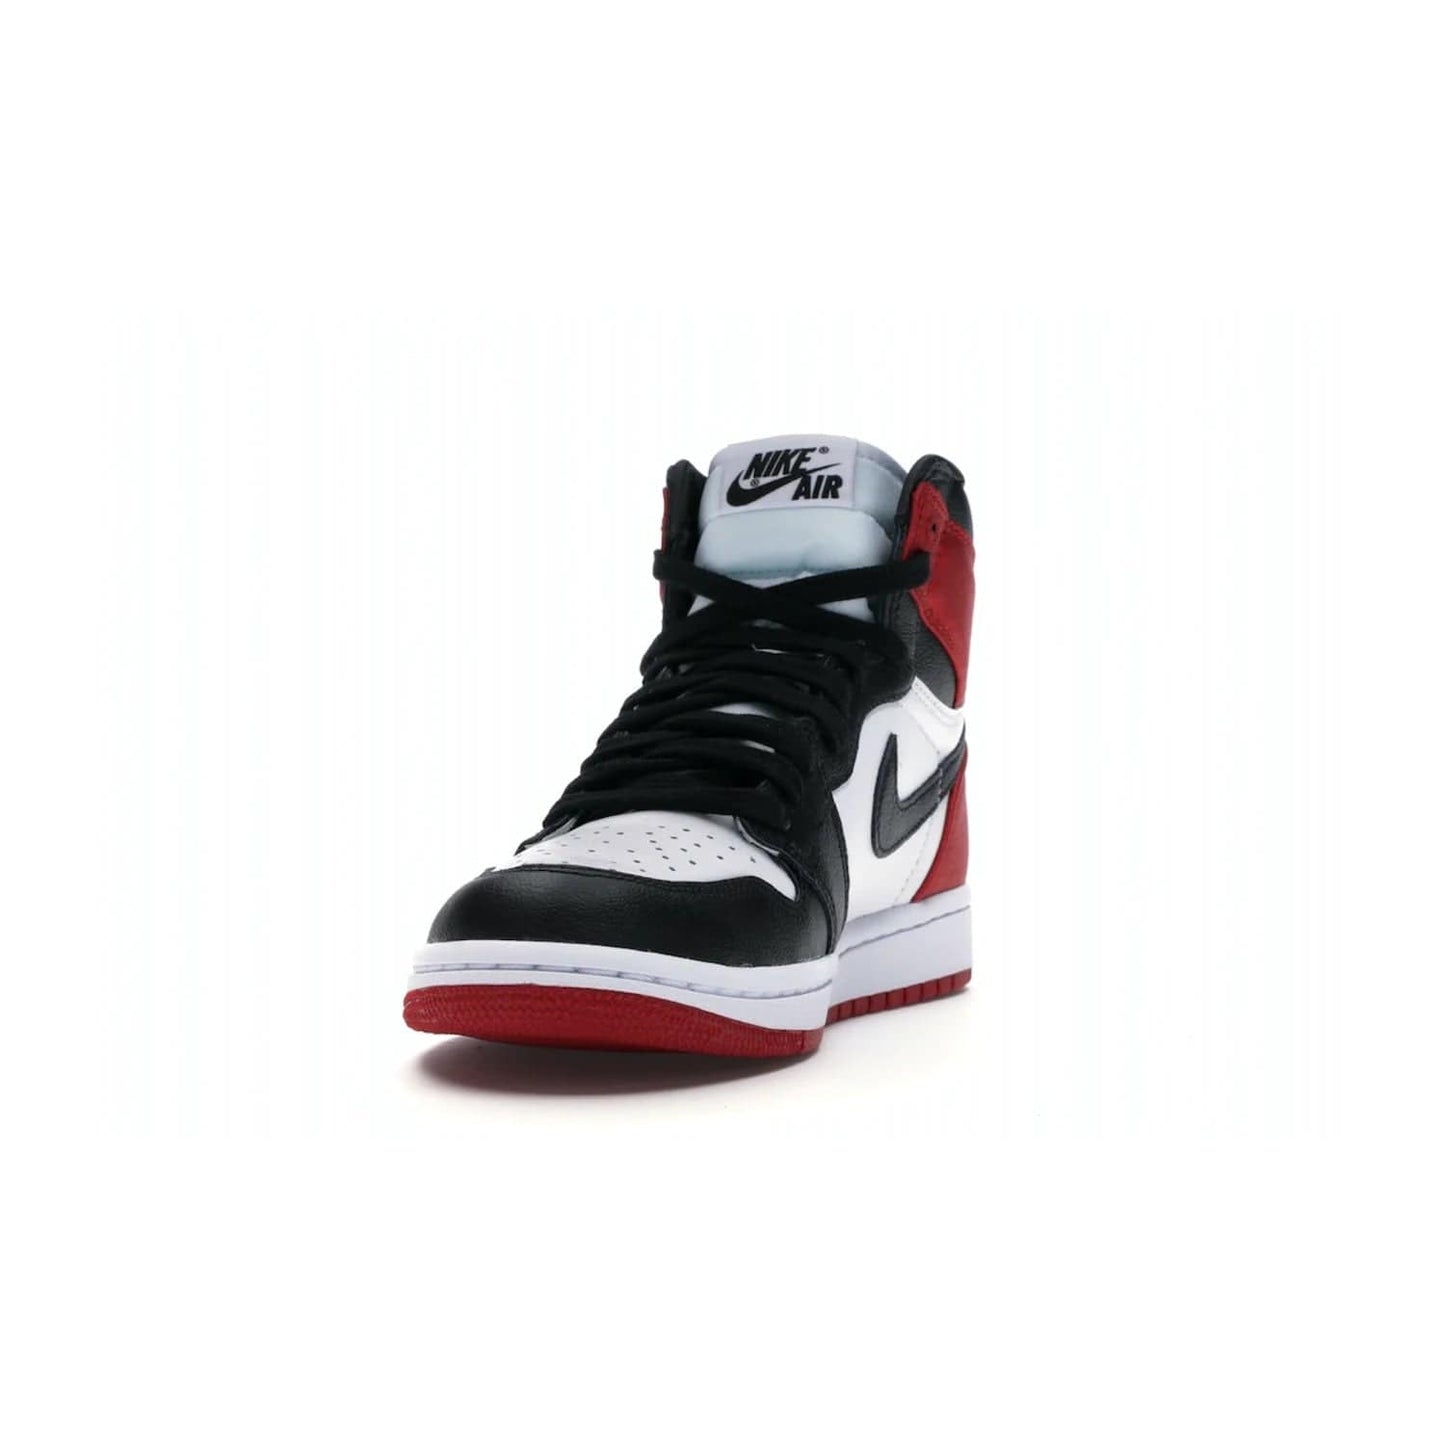 Jordan 1 Retro High Satin Black Toe (Women's) - Image 12 - Only at www.BallersClubKickz.com - Luxurious take on the timeless Air Jordan 1. Features a mix of black leather and satin materials with subtle University Red accents. Elevated look with metal Wings logo on the heel. Released in August 2019.